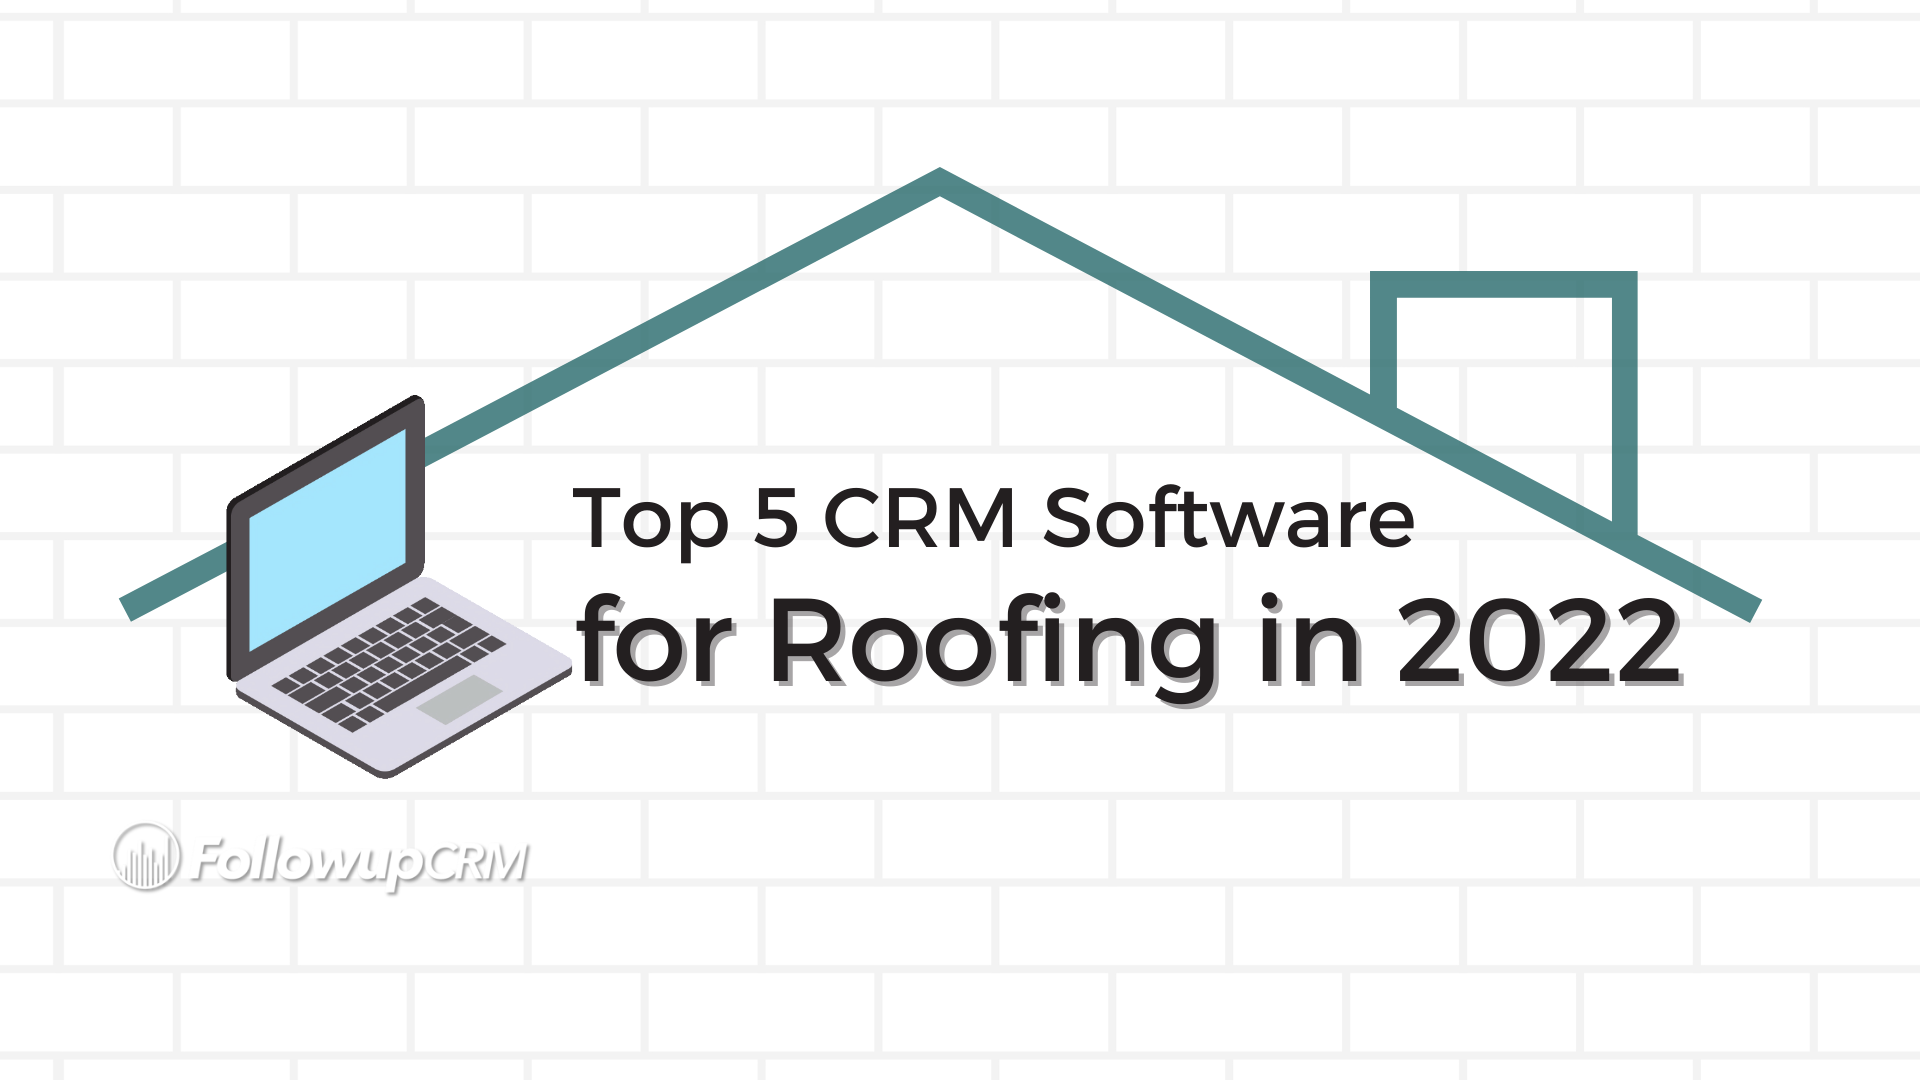 Top 5 CRM Software for Roofing in 2022